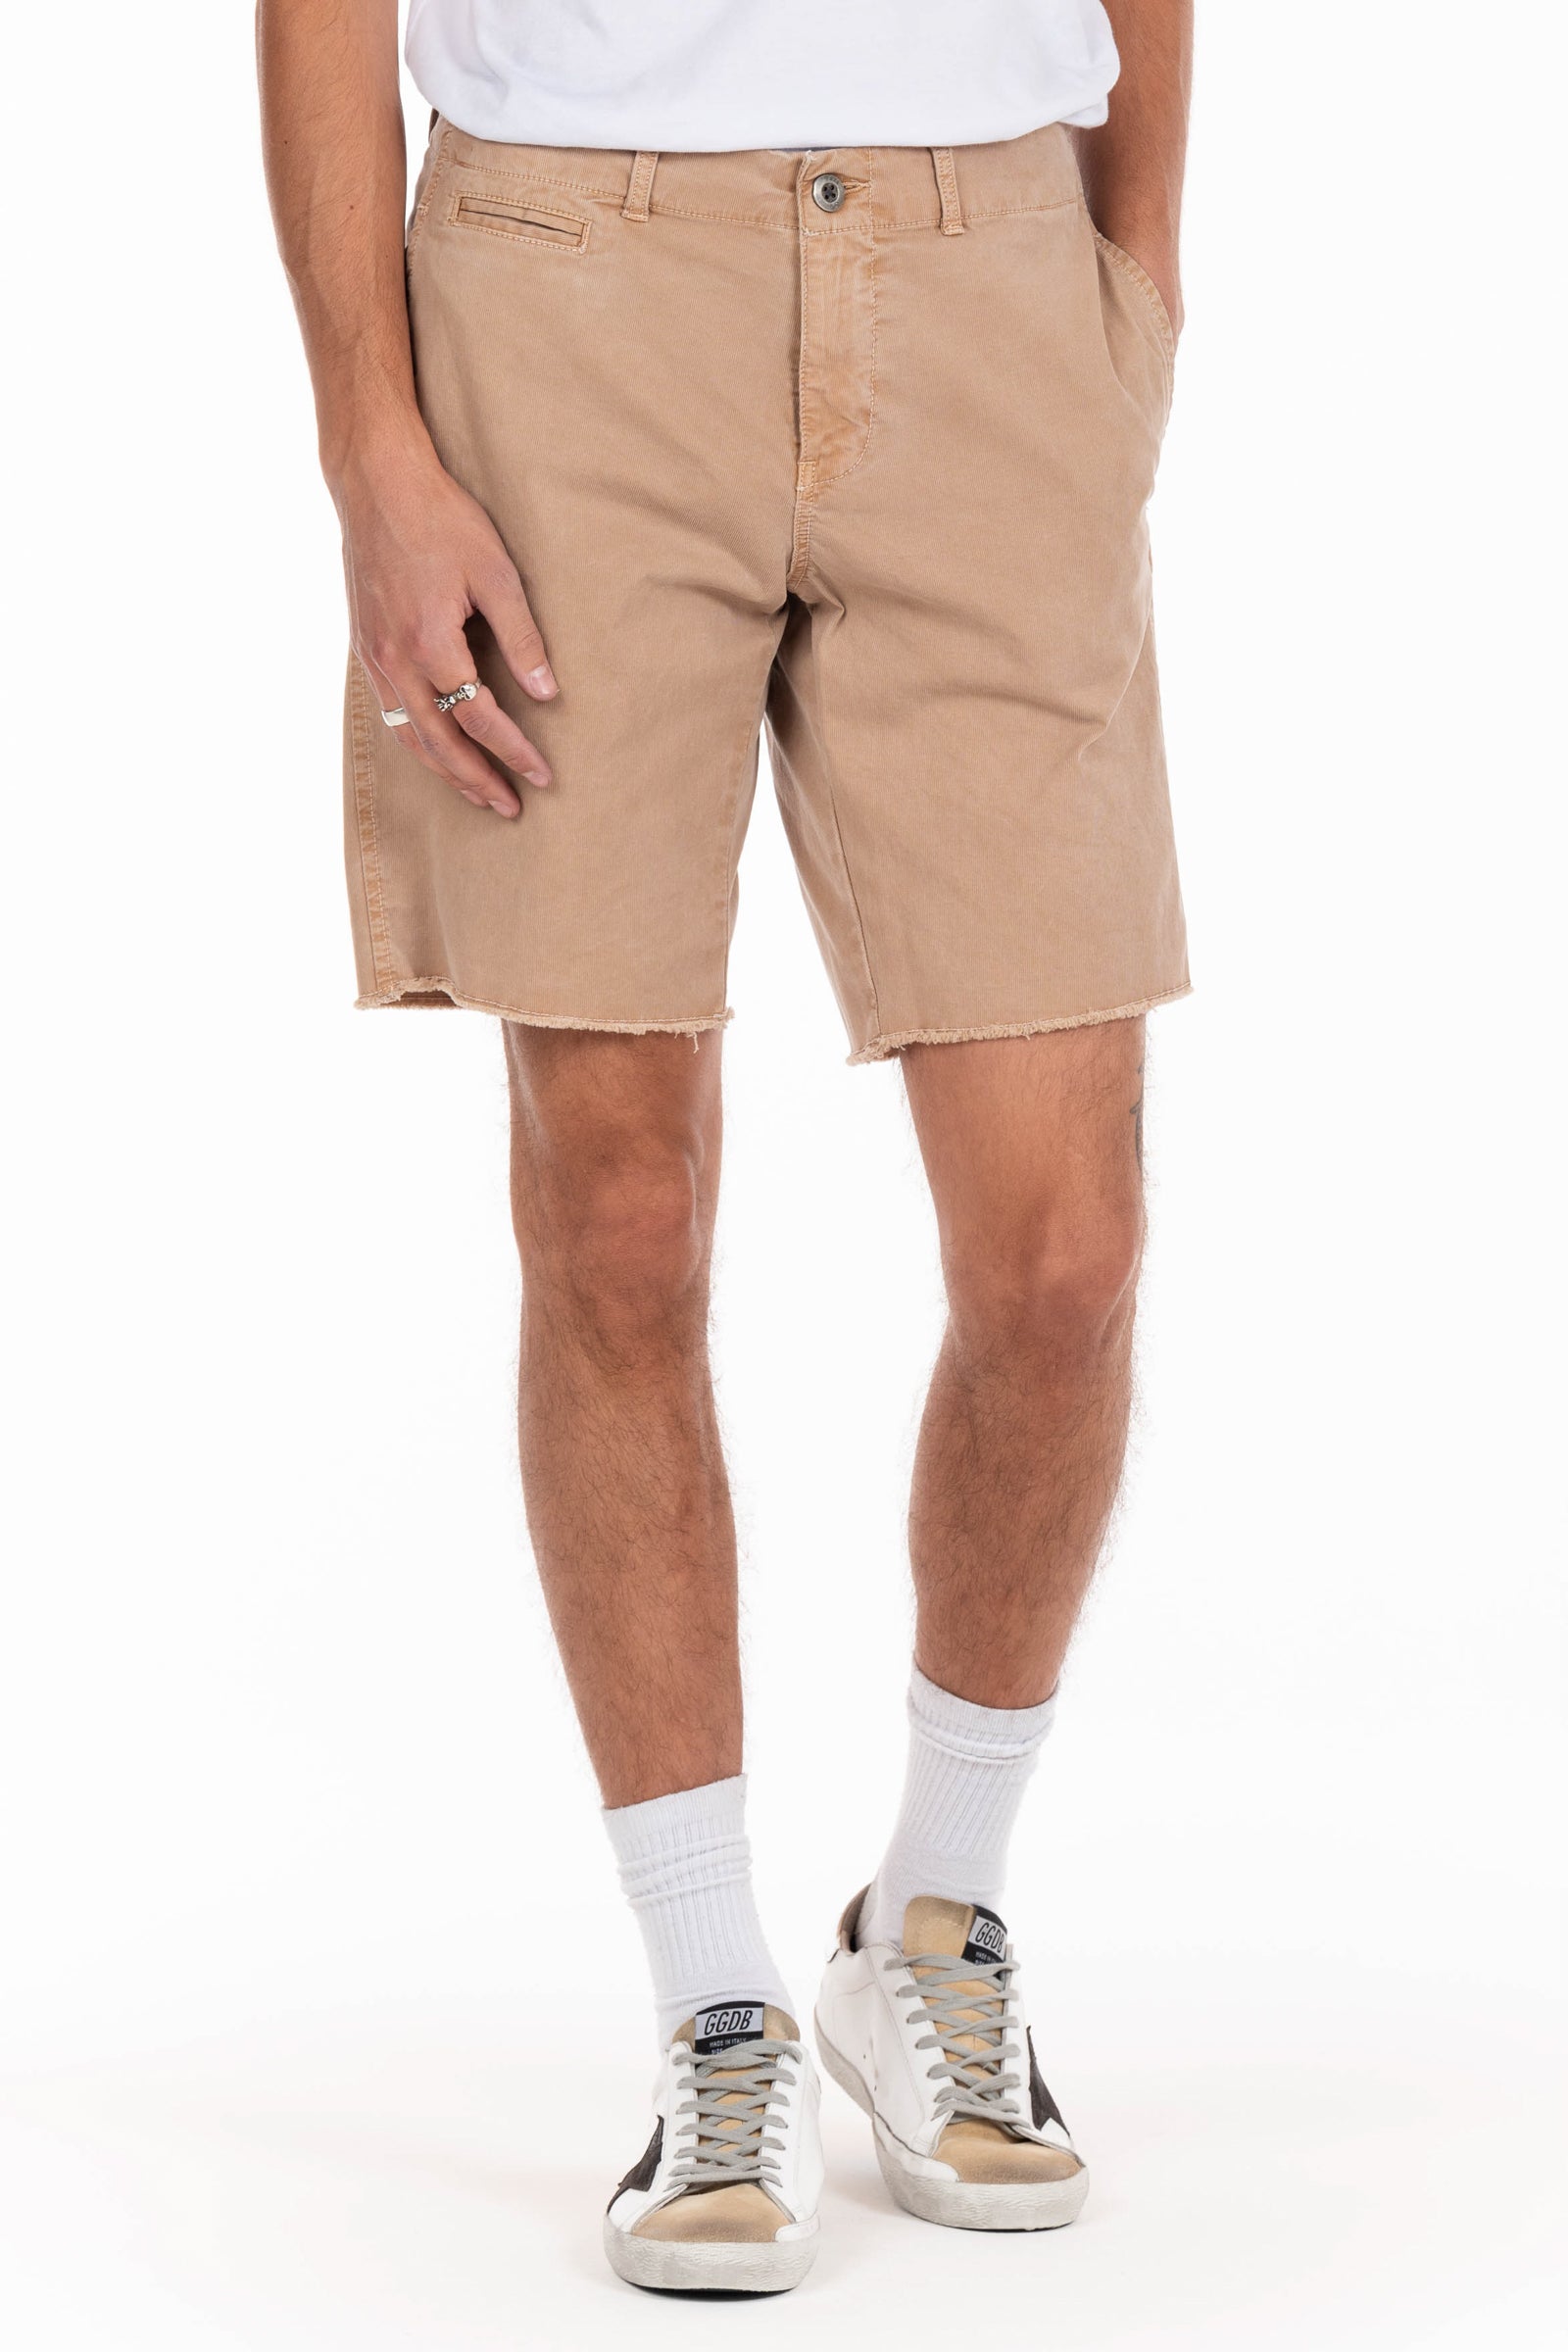 Original Paperbacks Rockland Chino Short in Khaki on Model Cropped Styled View